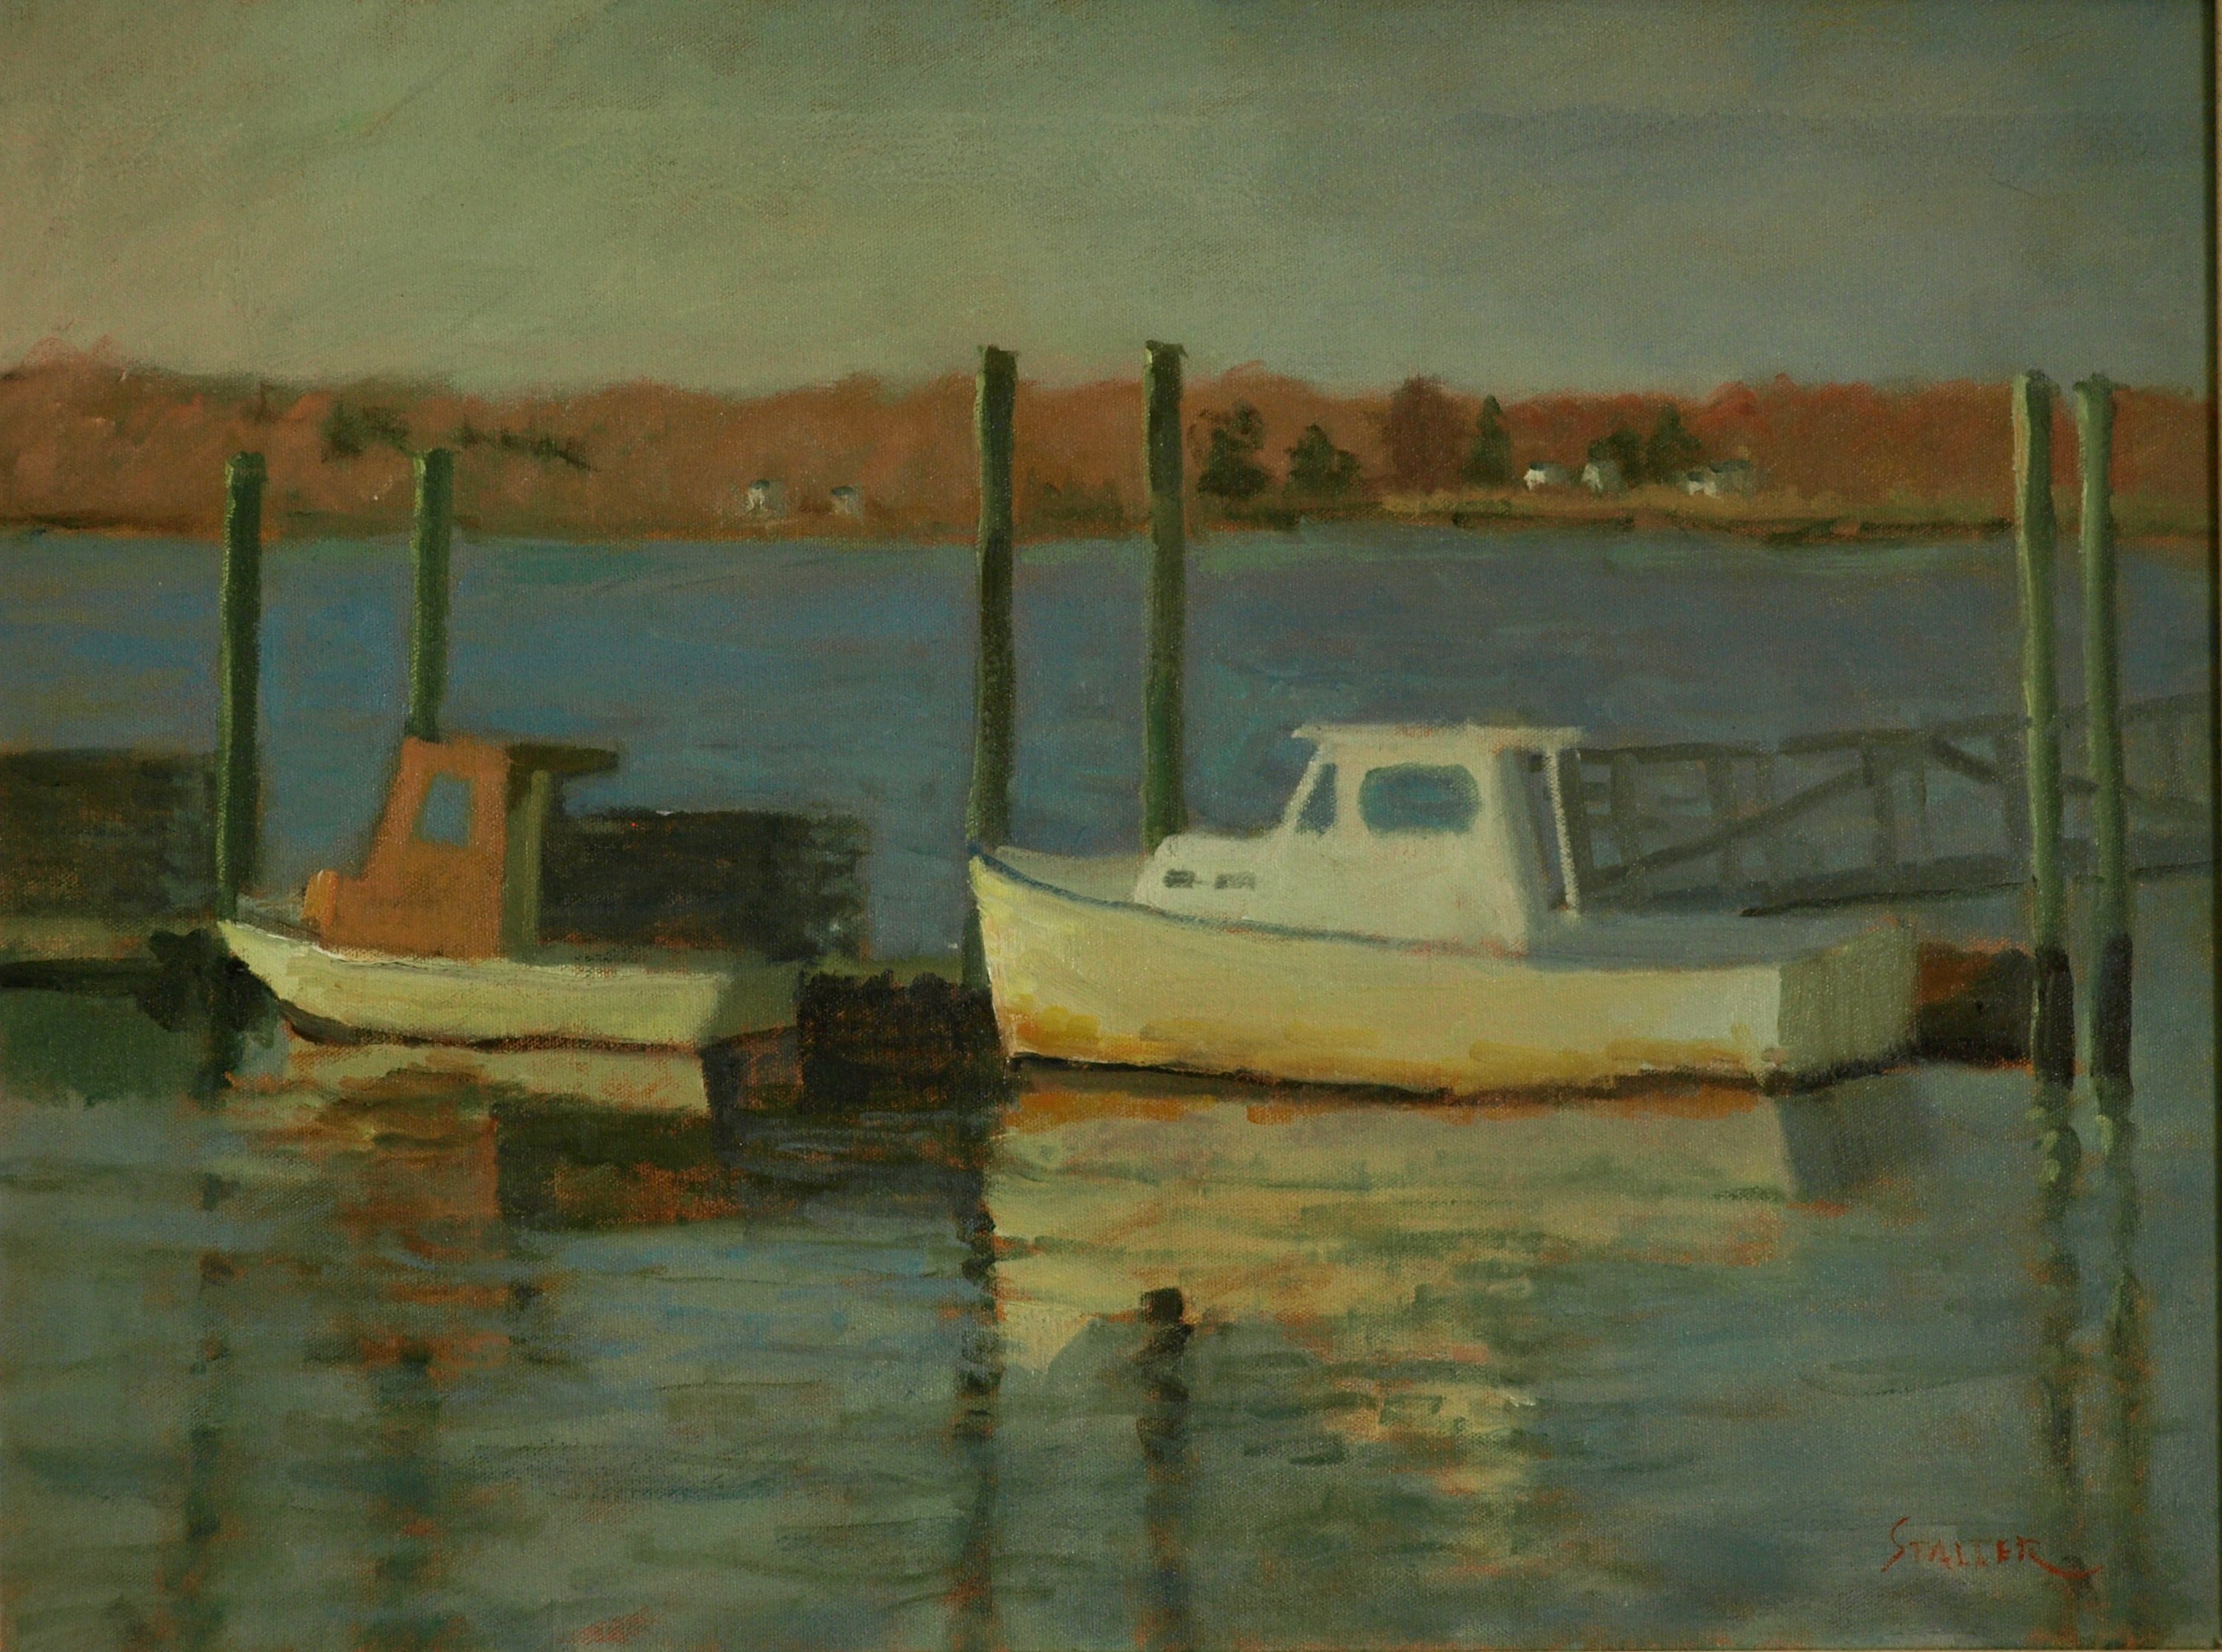 Boats in Stonington, Oil on Canvas, 18 x 24 Inches, by Richard Stalter, $475